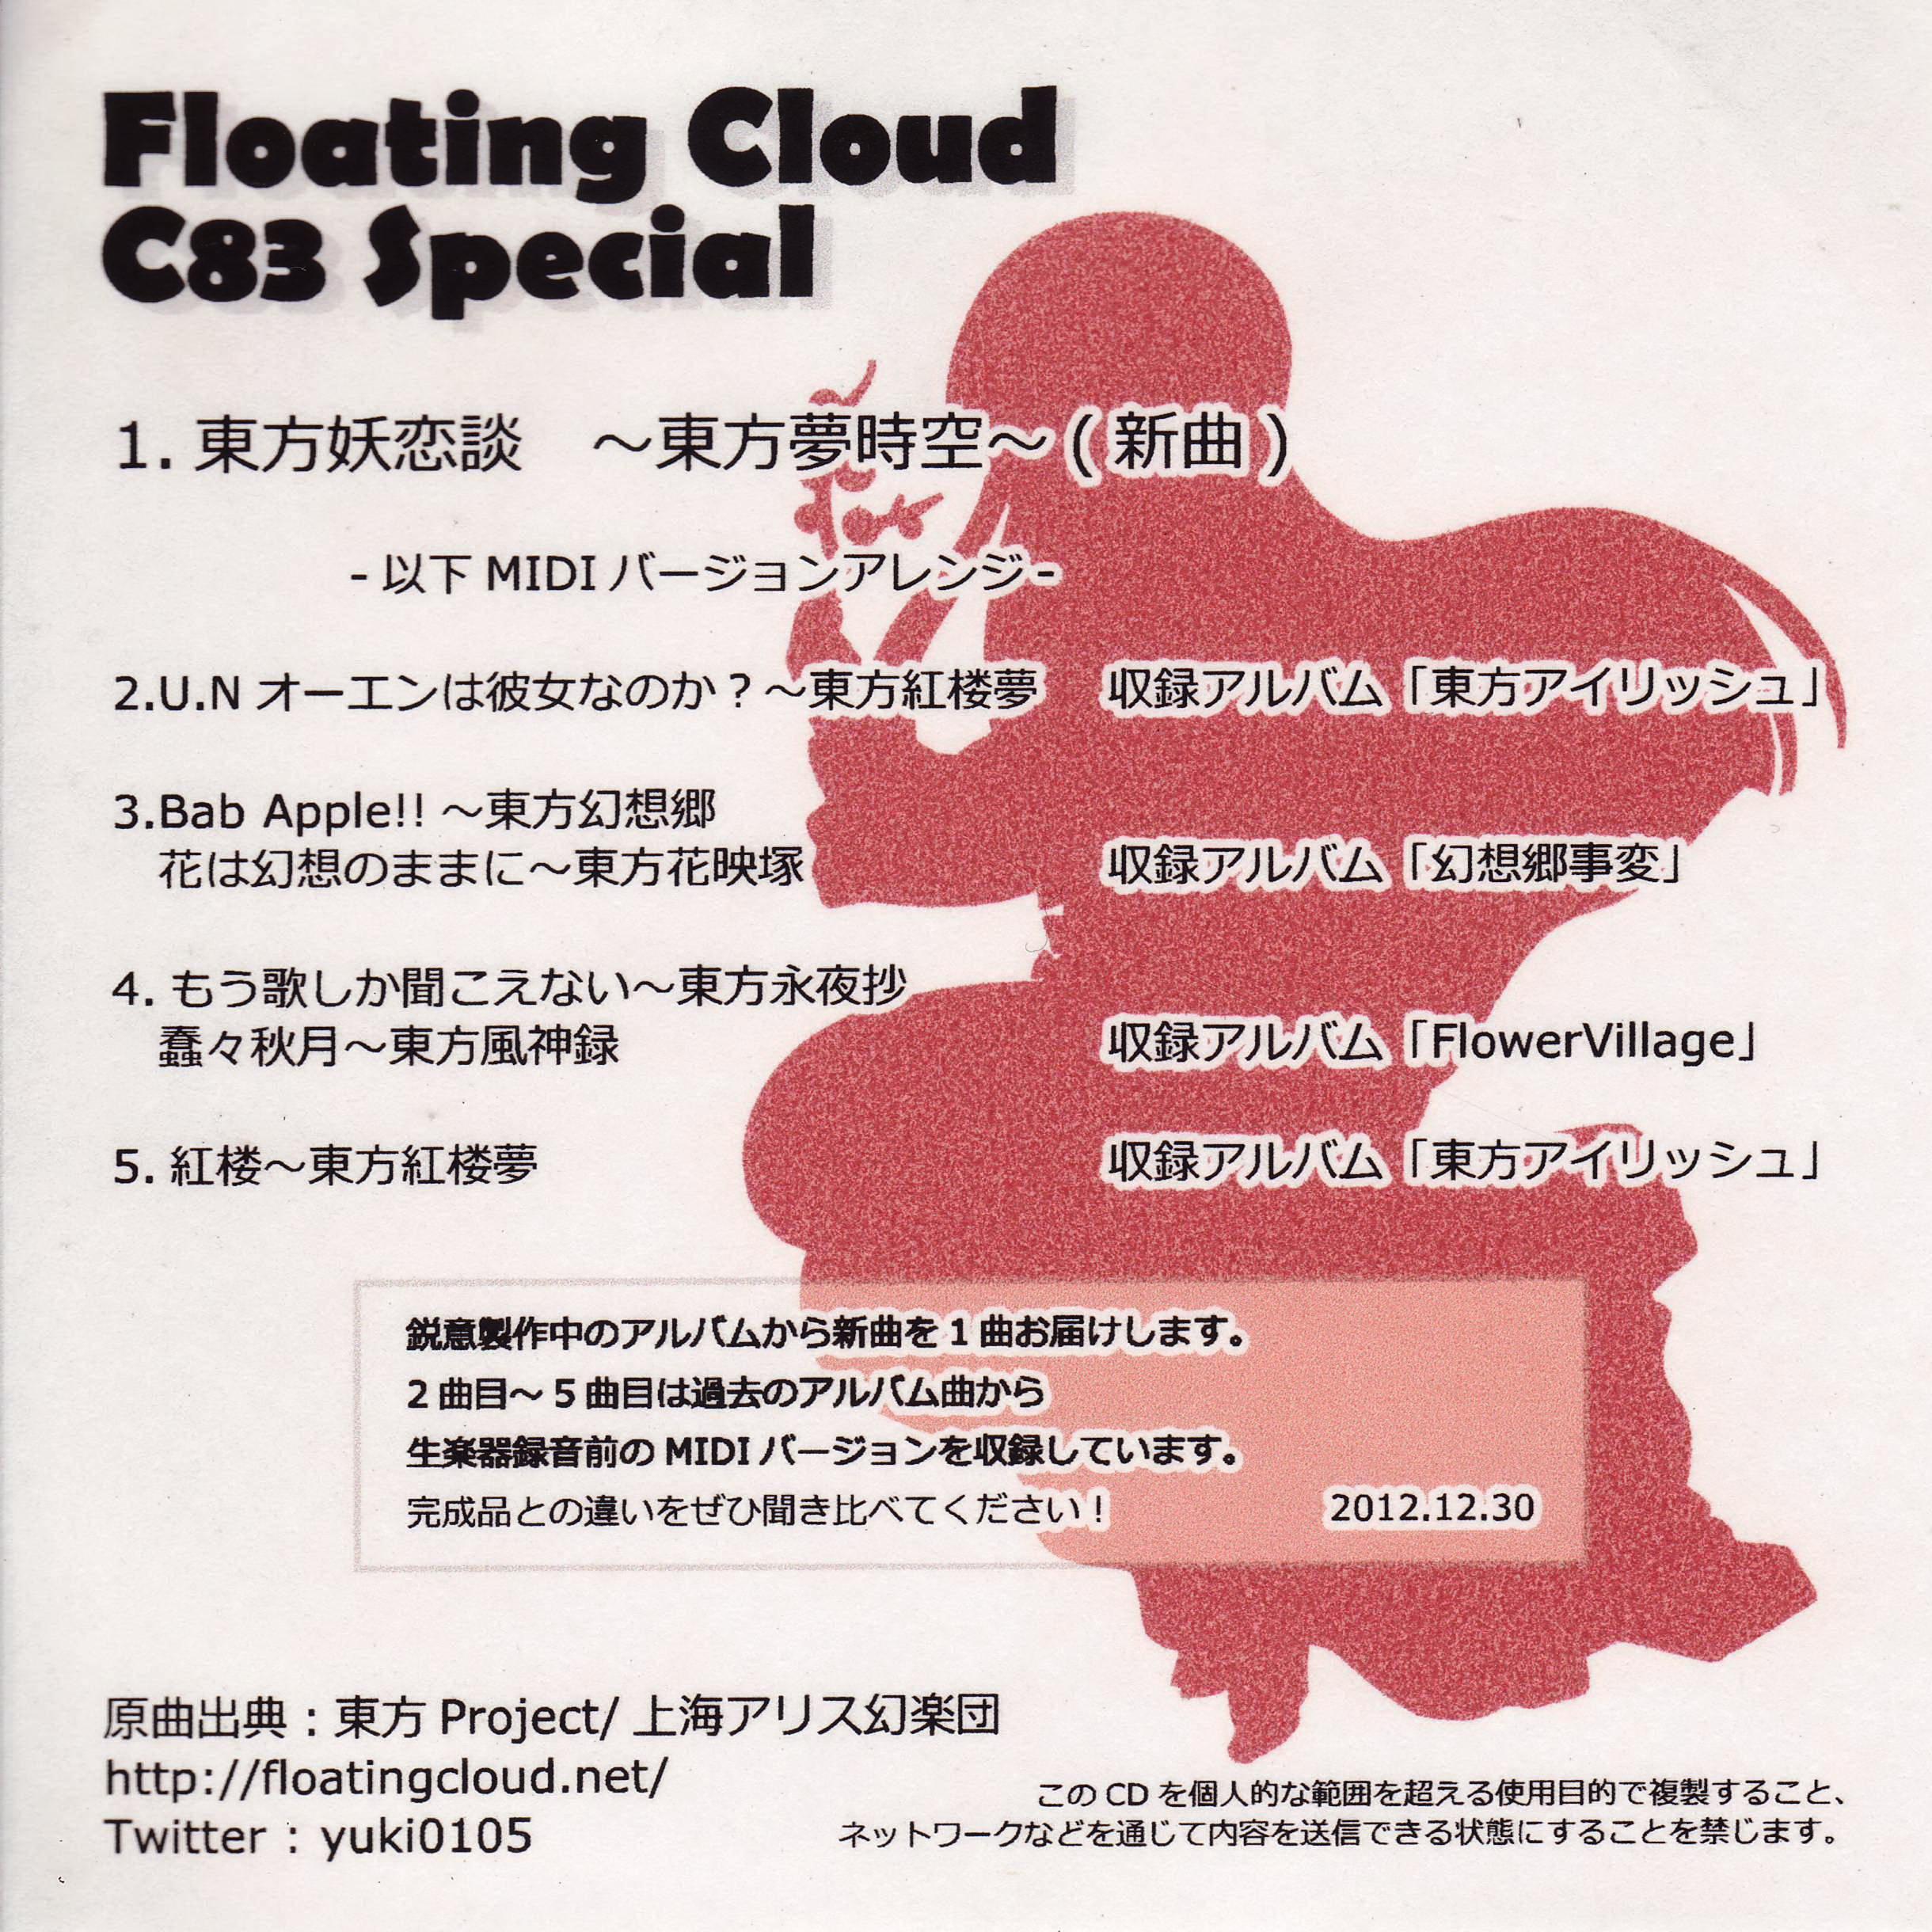 Floating Cloud C Special